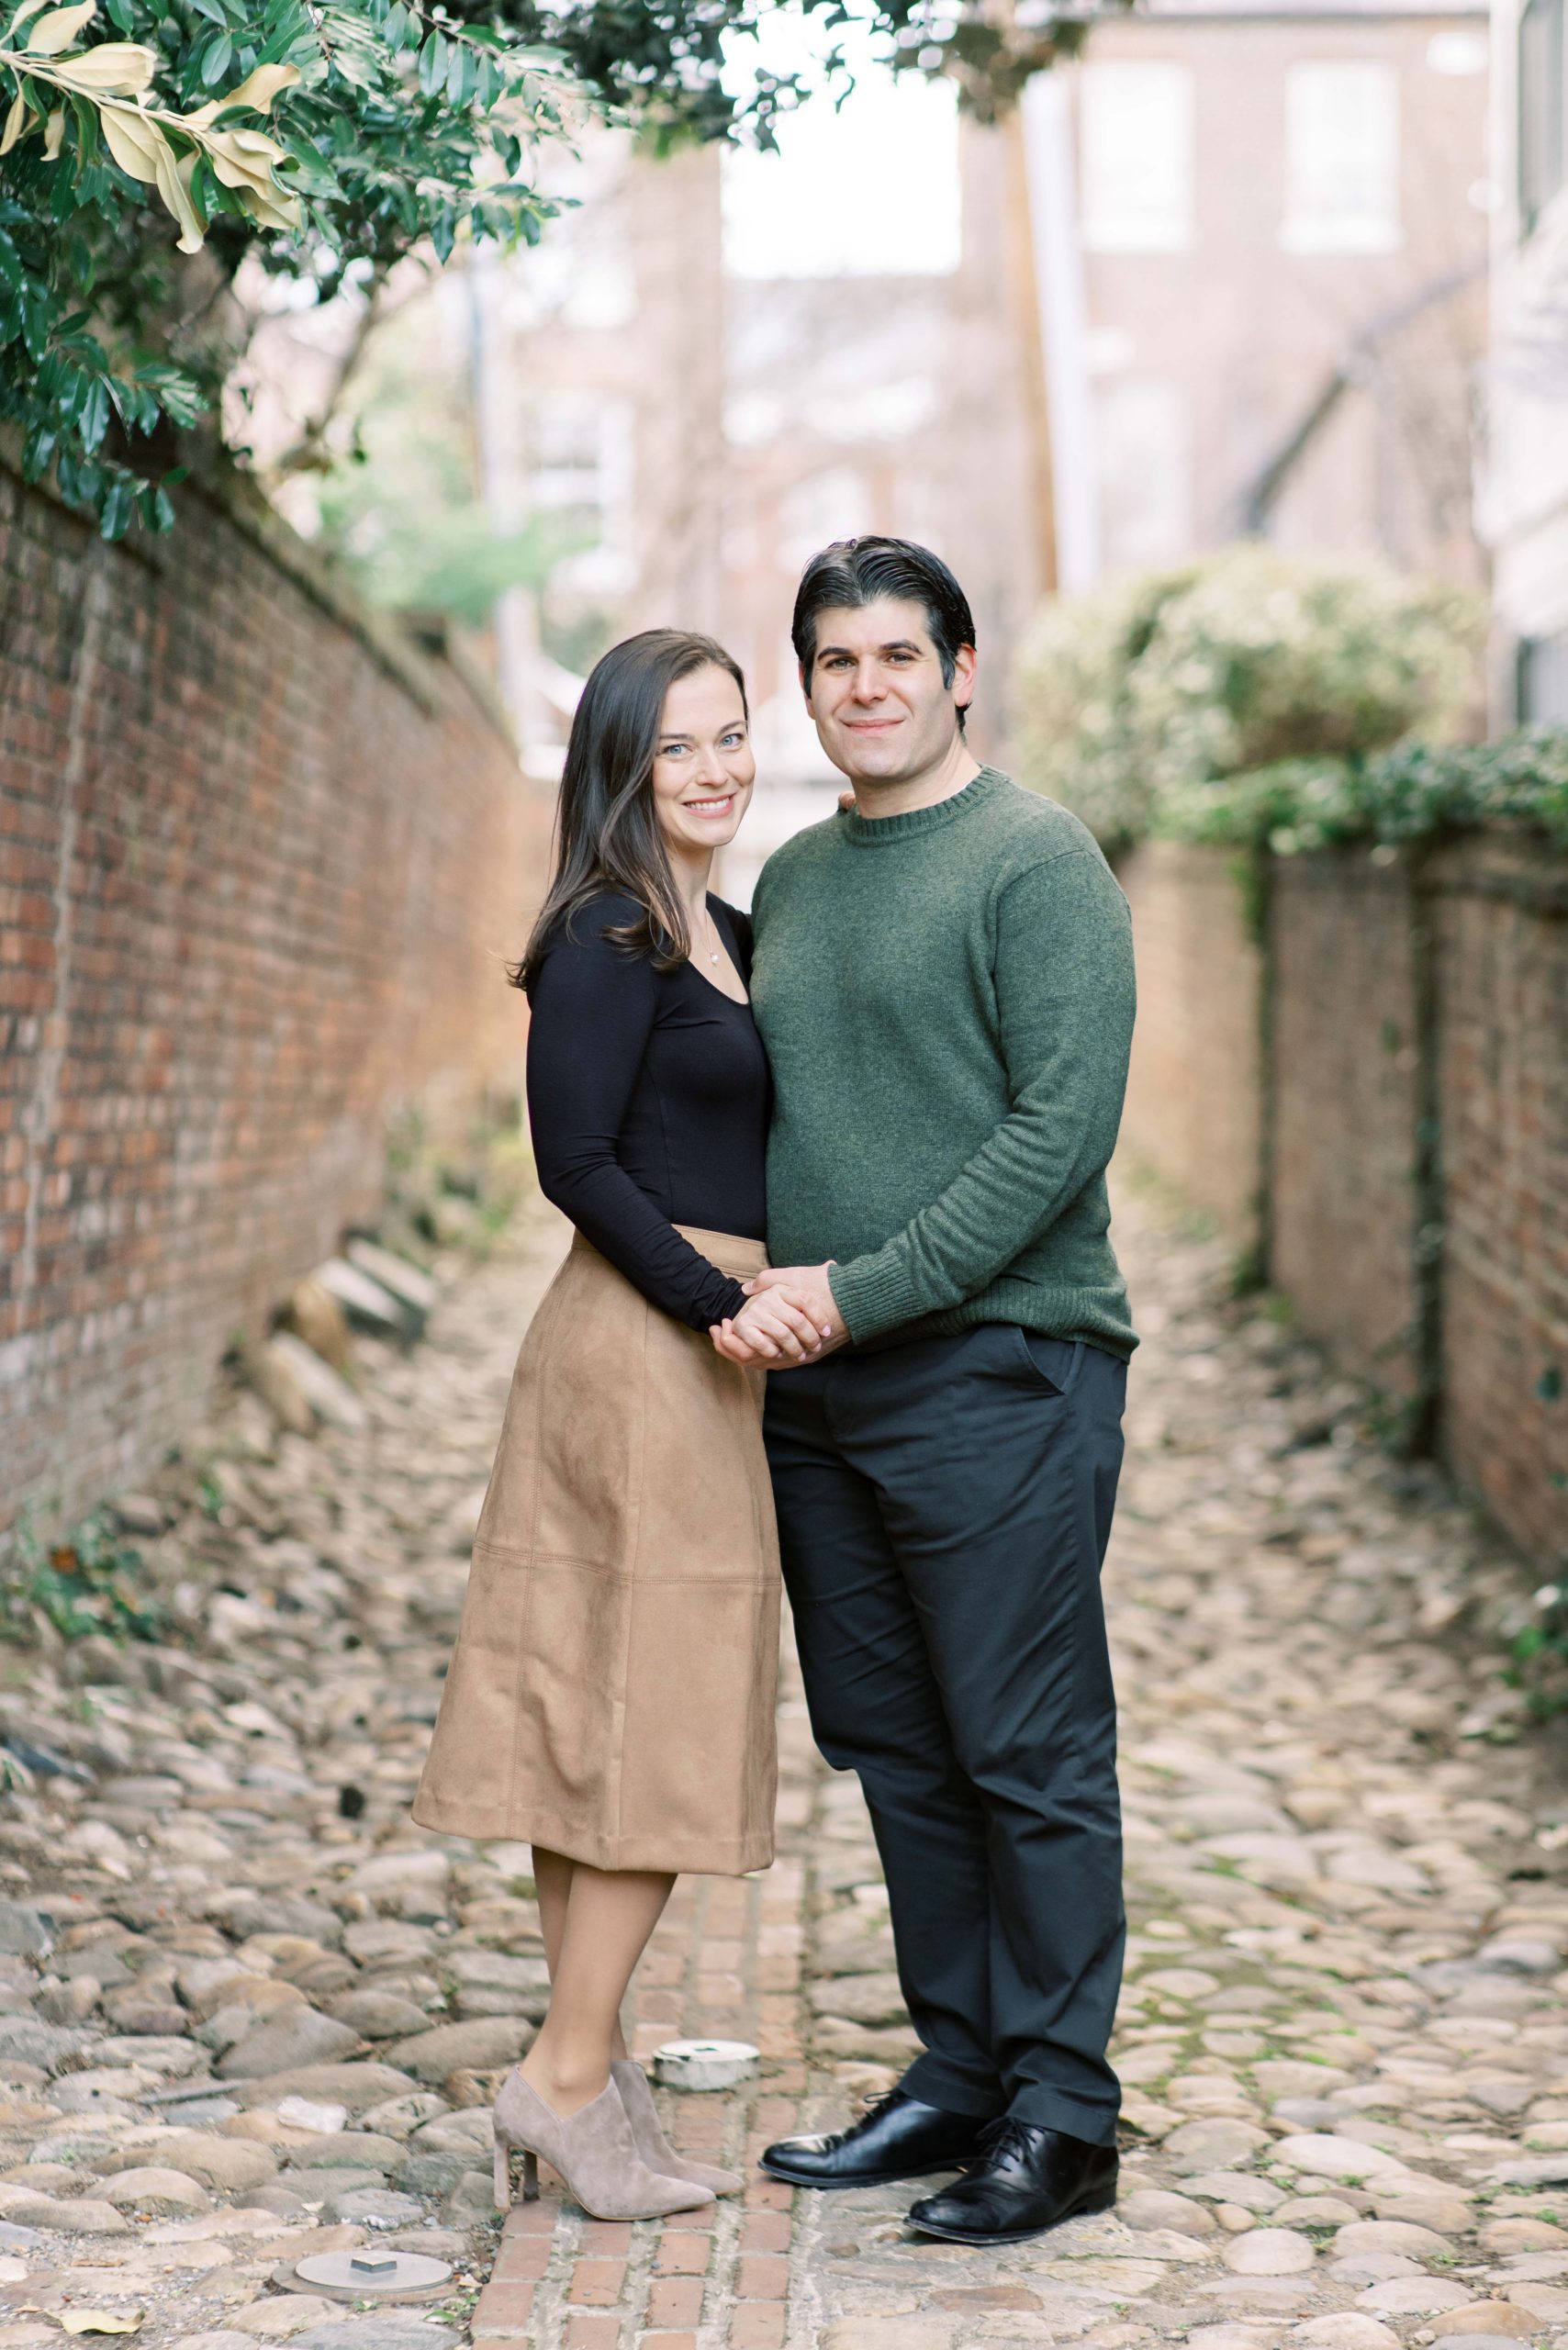 A romantic winter engagement session in Old Town Alexandria, VA.